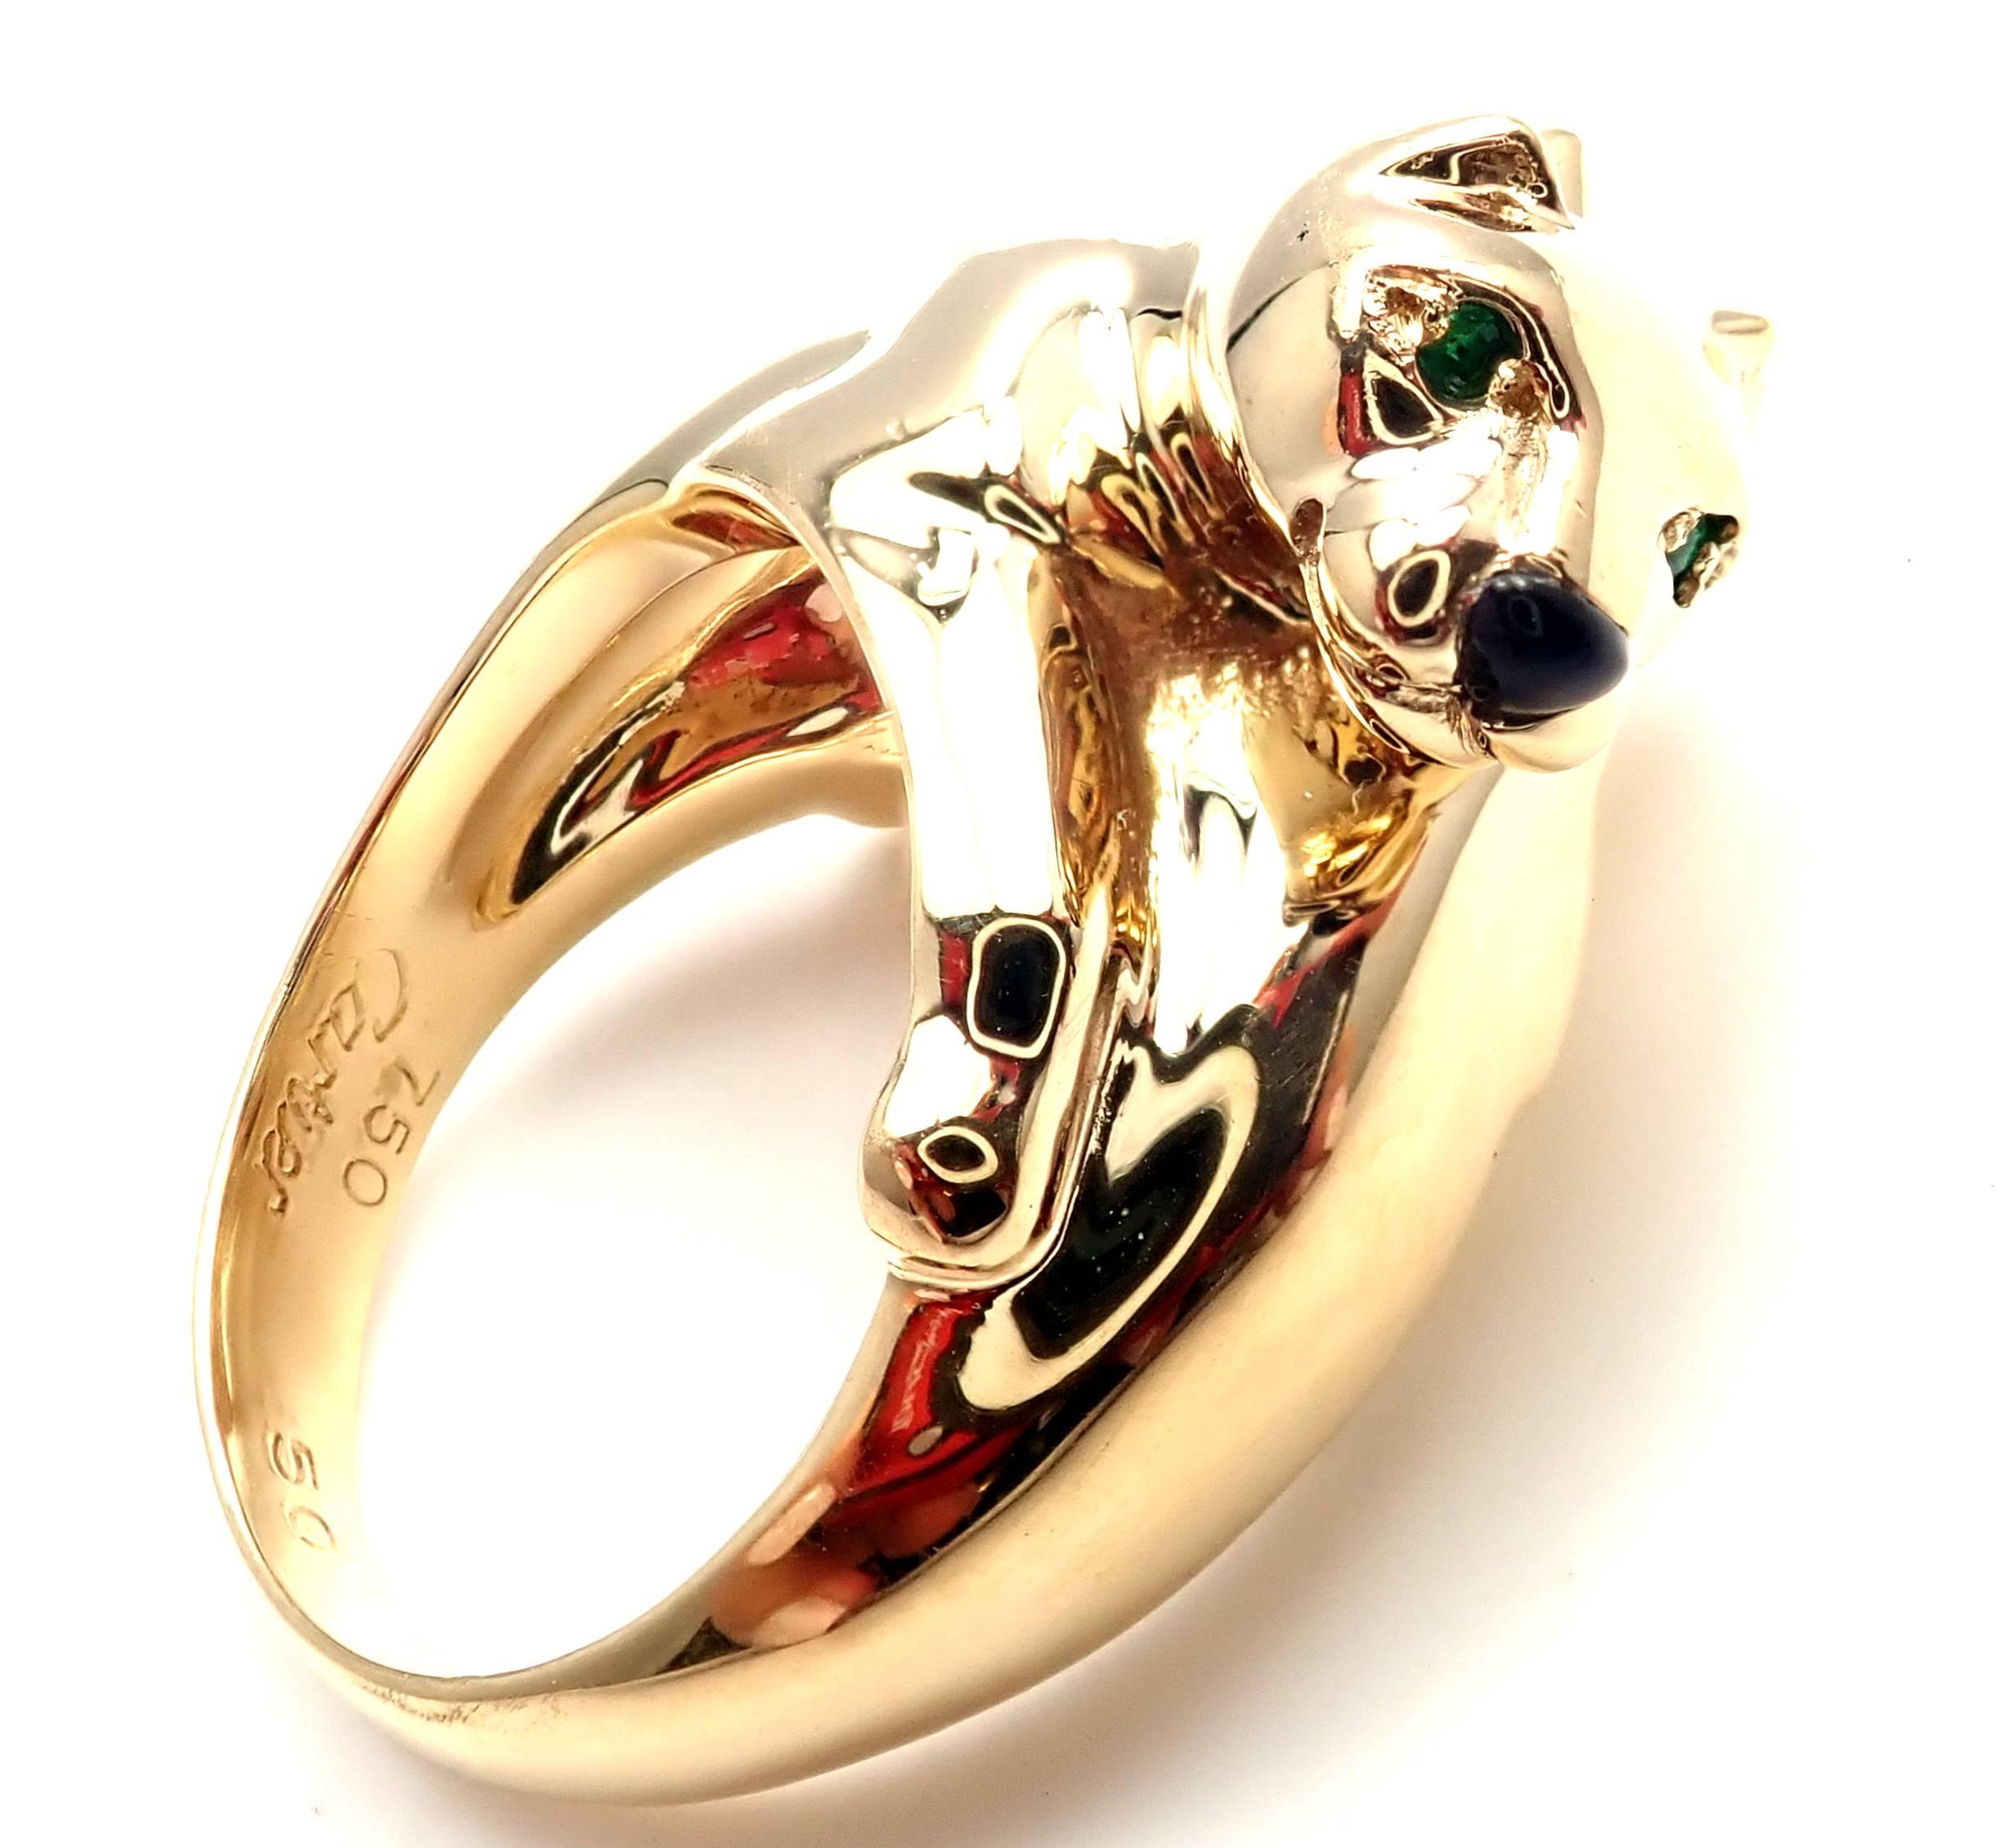 18k Yellow Gold Double Panther Emerald Black Onyx Ring by Cartier
With 4 Emerald Eyes, and 2 Onyx Noses.
This ring comes with original Cartier certificate and Cartier box.
Details:
Ring Size: European 50 US 5 1/4
Width: 13mm
Weight: 14.2